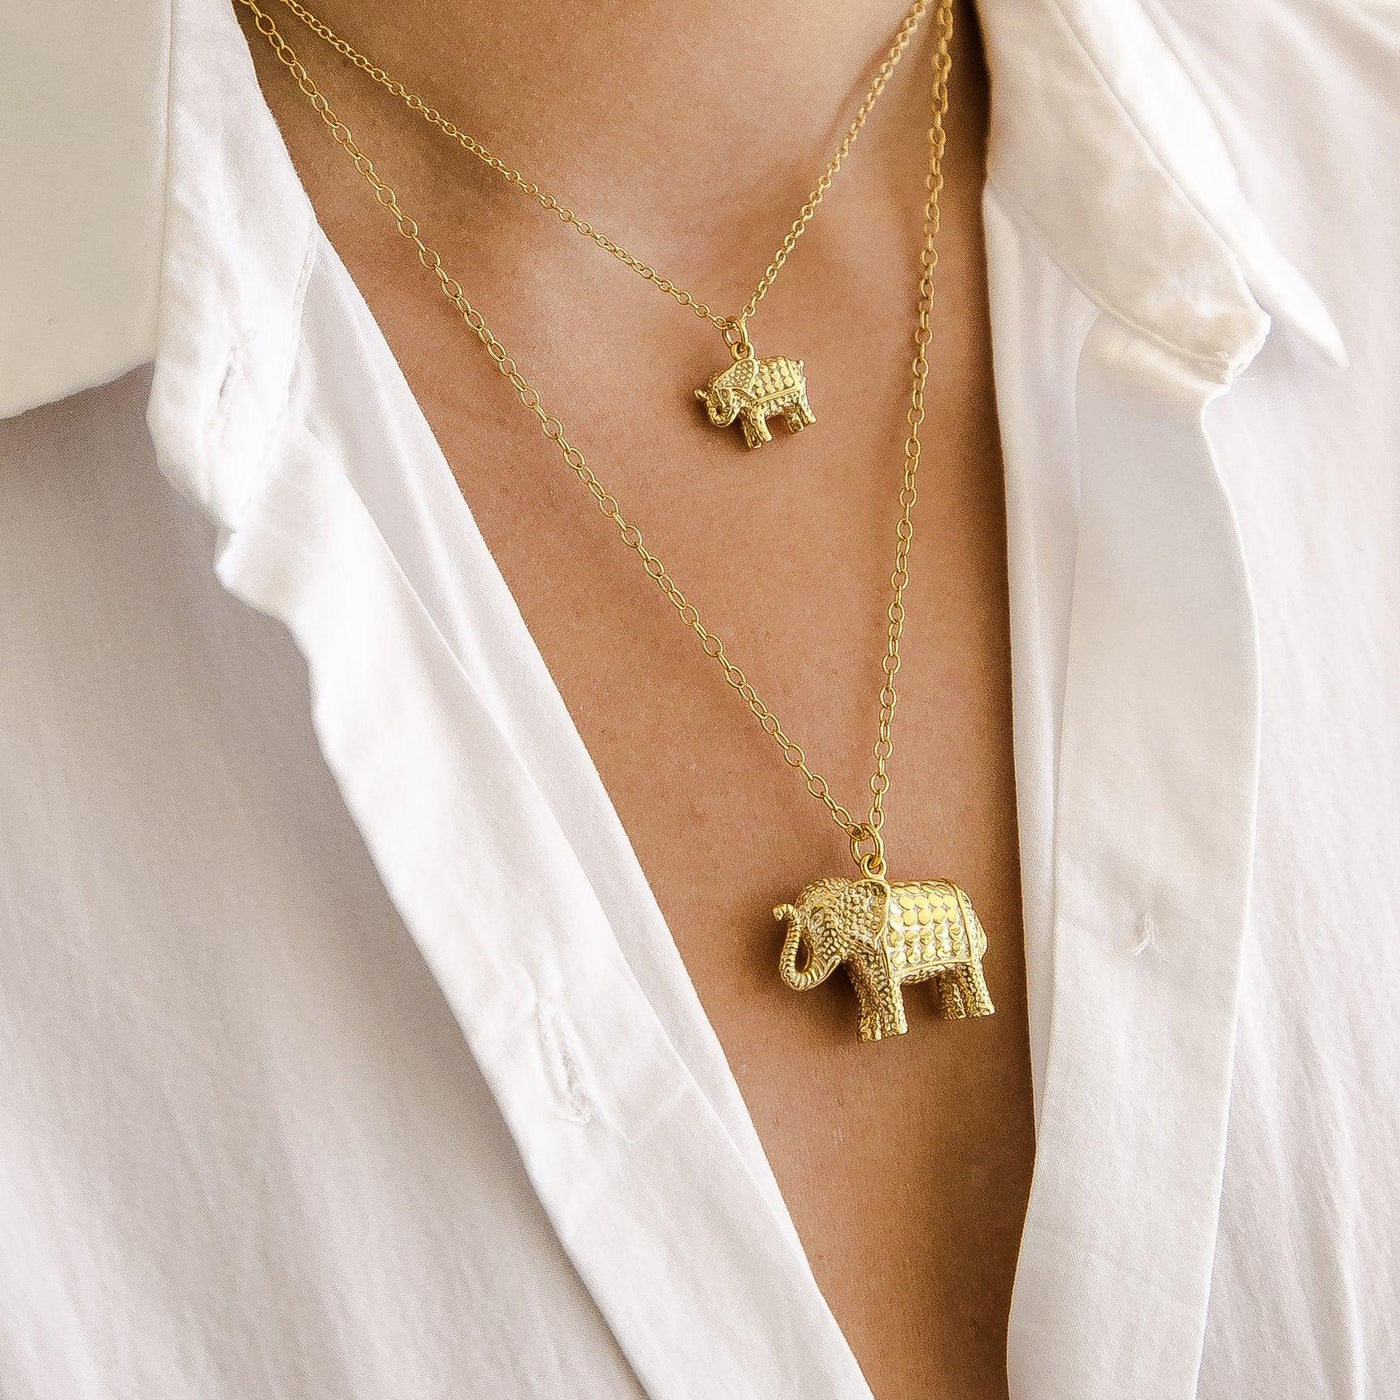 Anna Beck Small Elephant Charm Charity Necklace - Rococo Jewellery